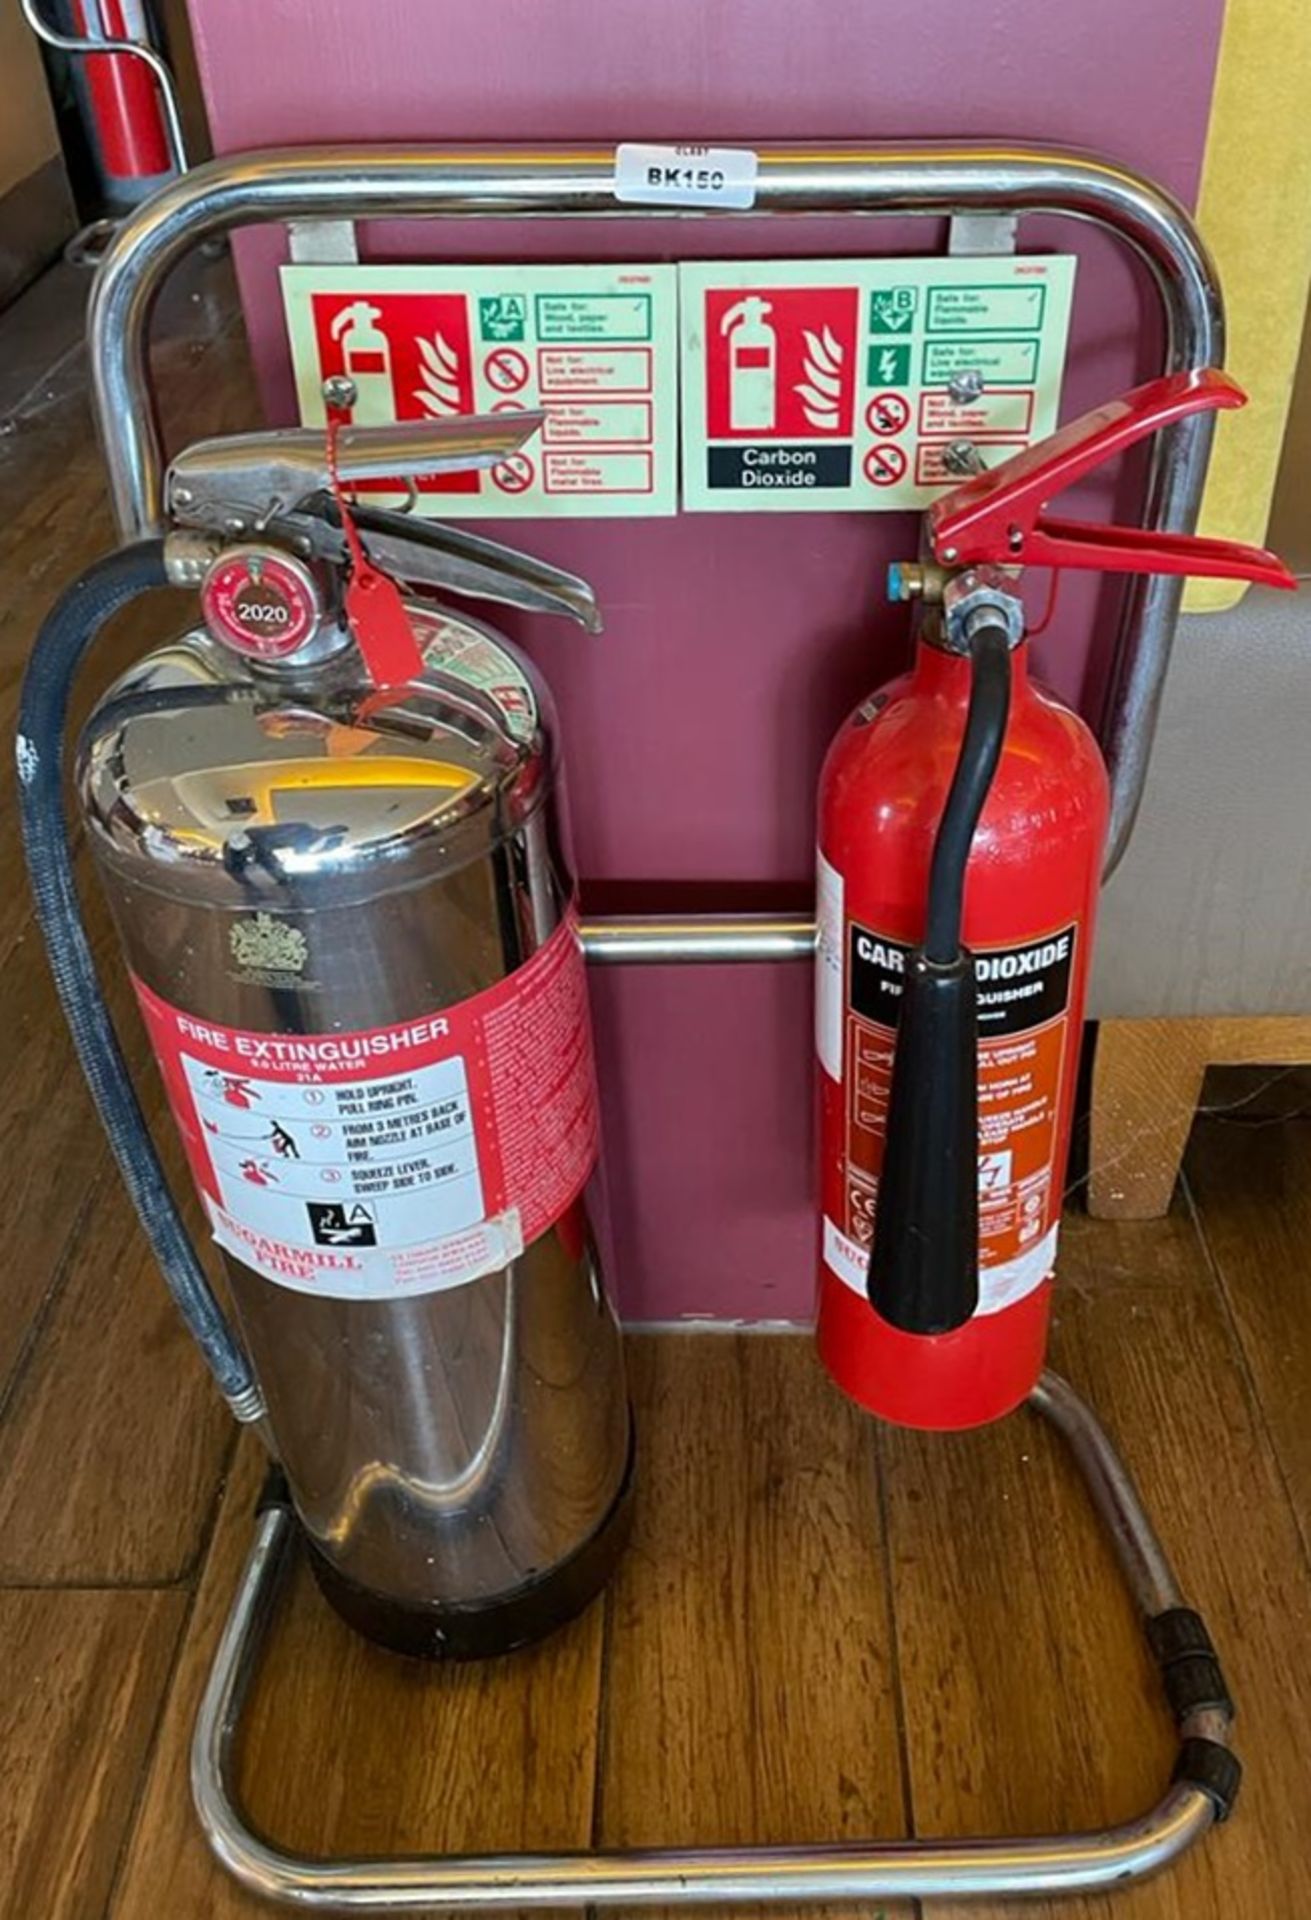 2 x Fire Extinguishers With Chrome Stand - Includes 9l Water and 2kg Carbon Dioxide - Ref: BK150 -